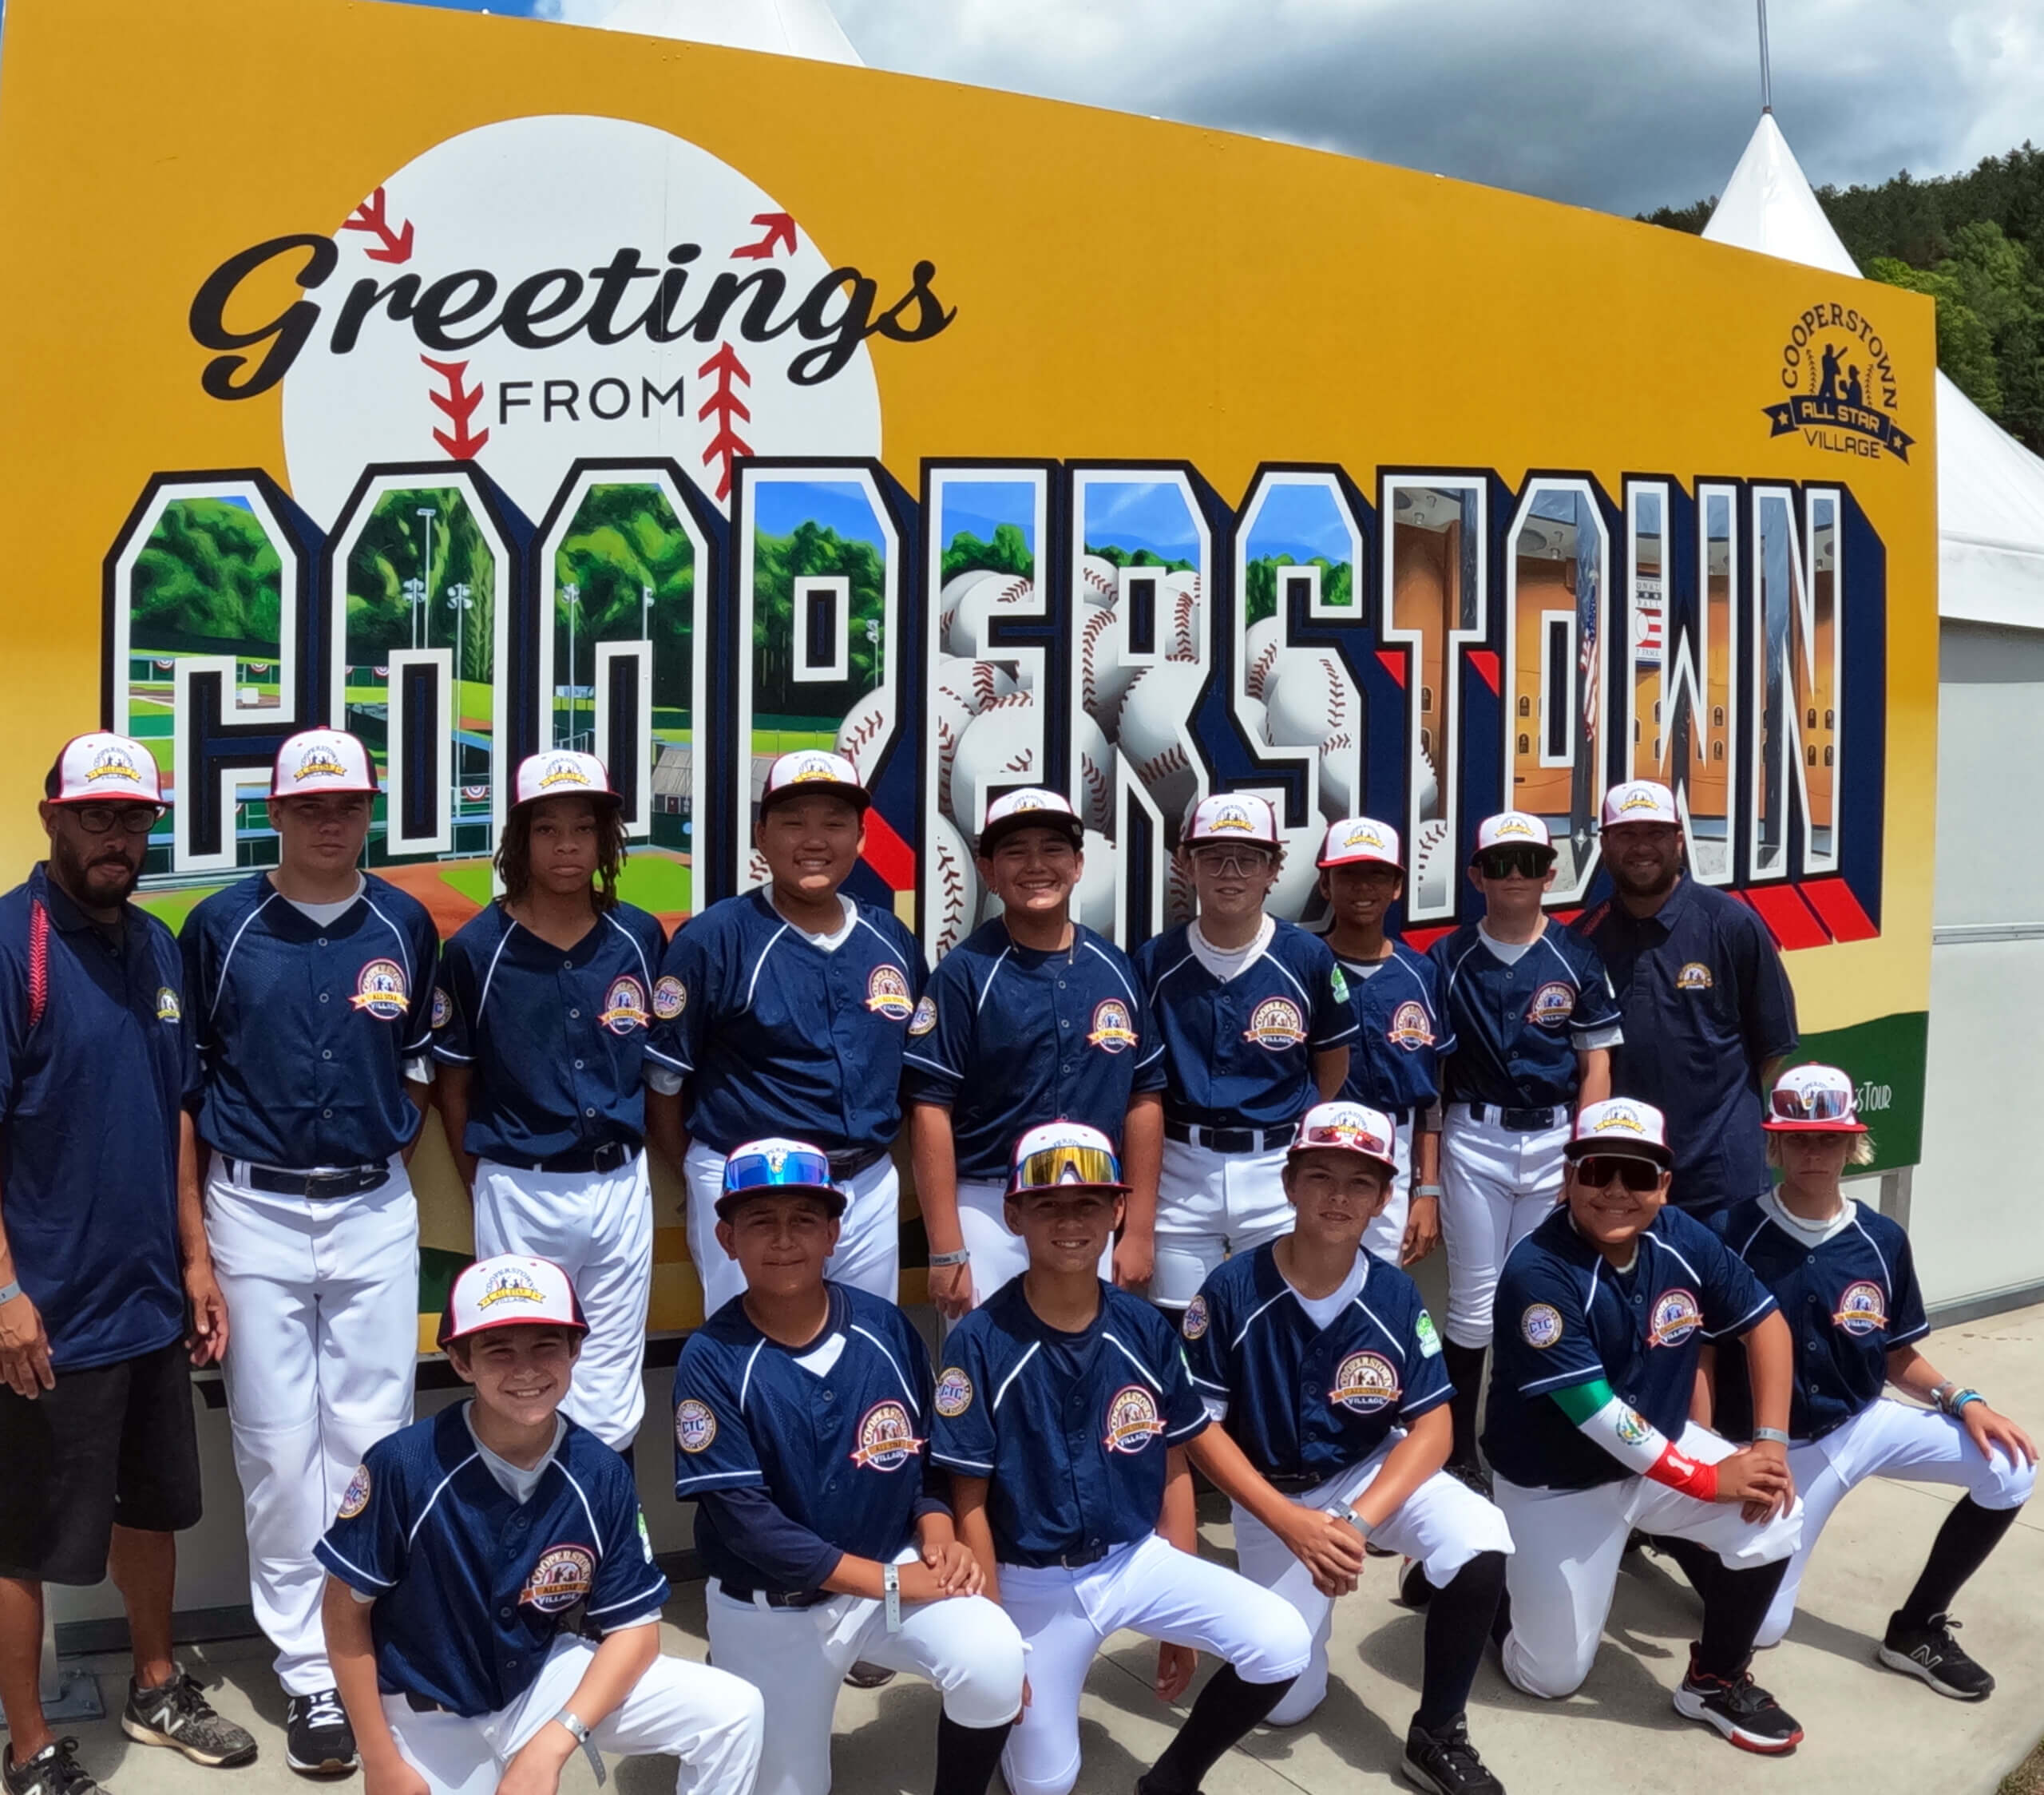 Baseball team in front of a cooperstown mural